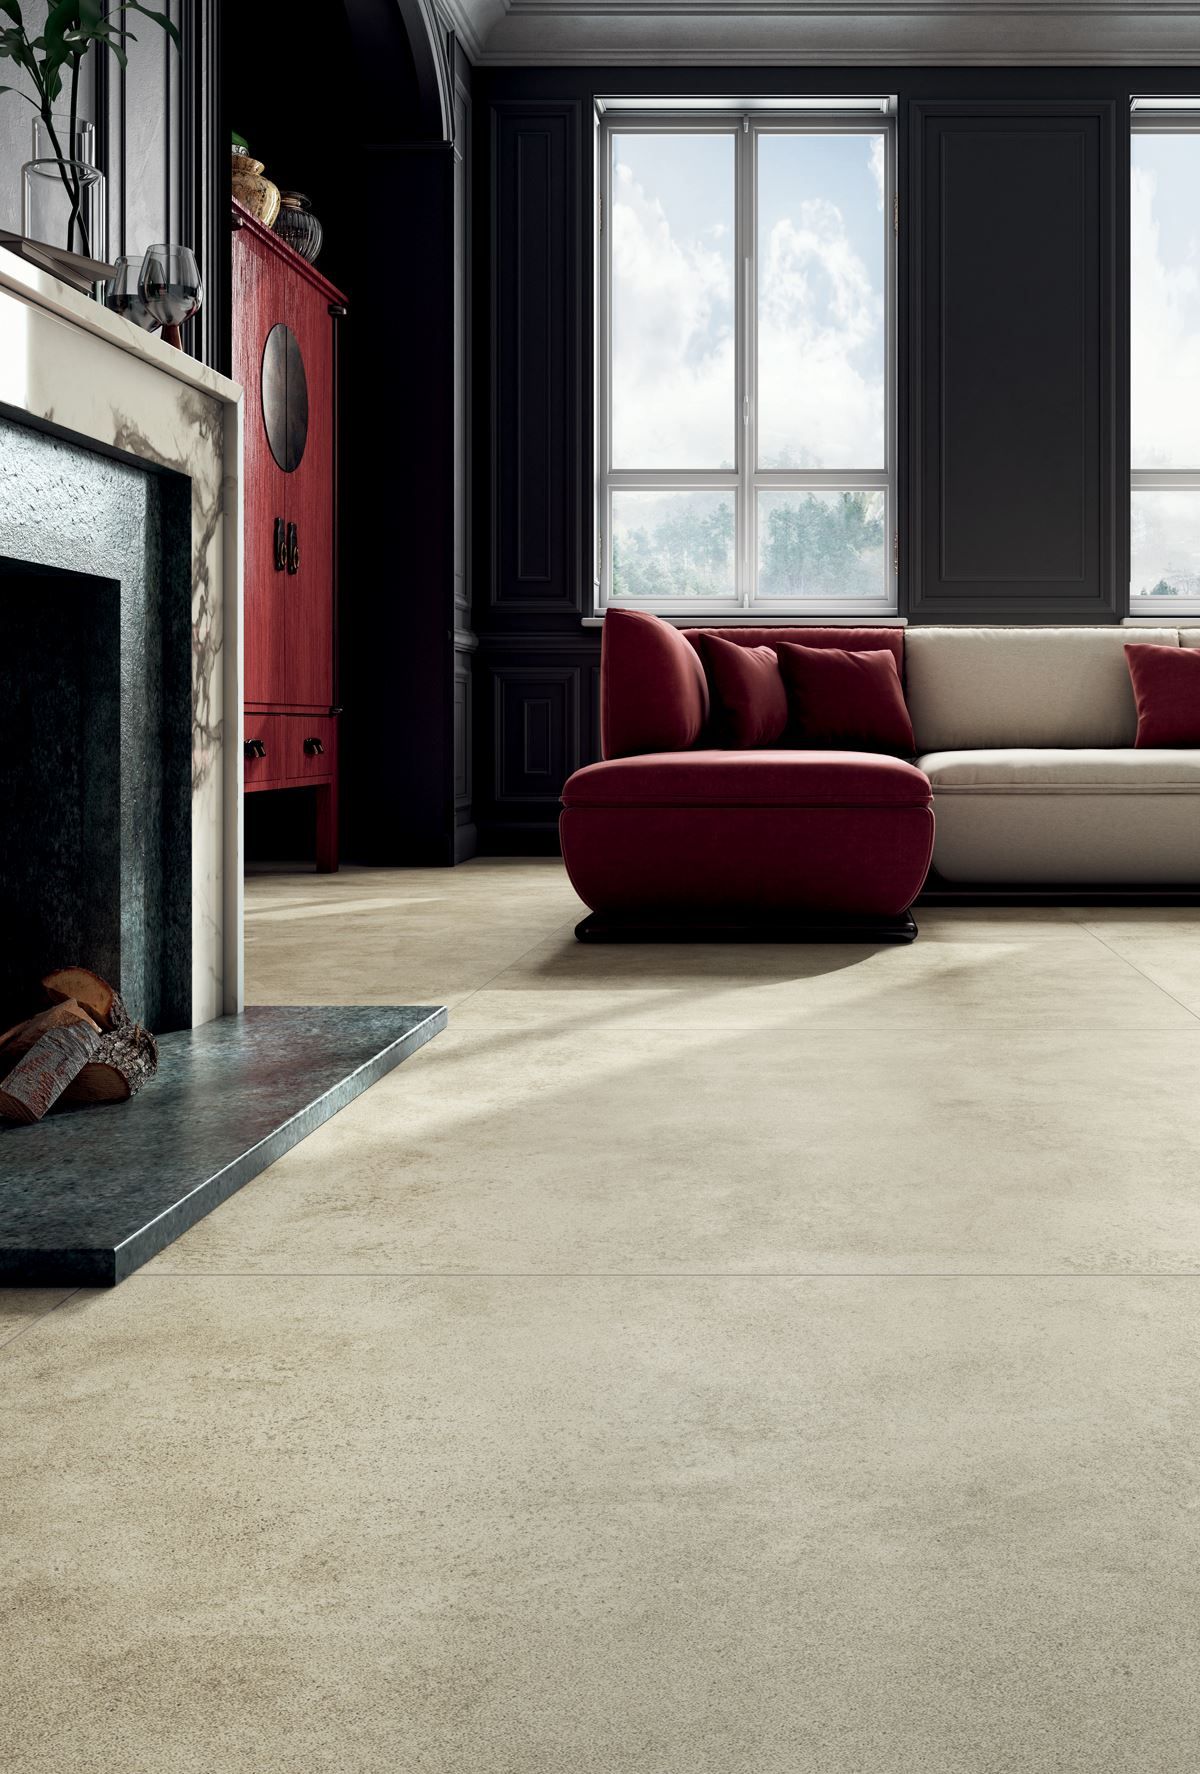 GRUNGE TAUPE Naturale floor 60x120